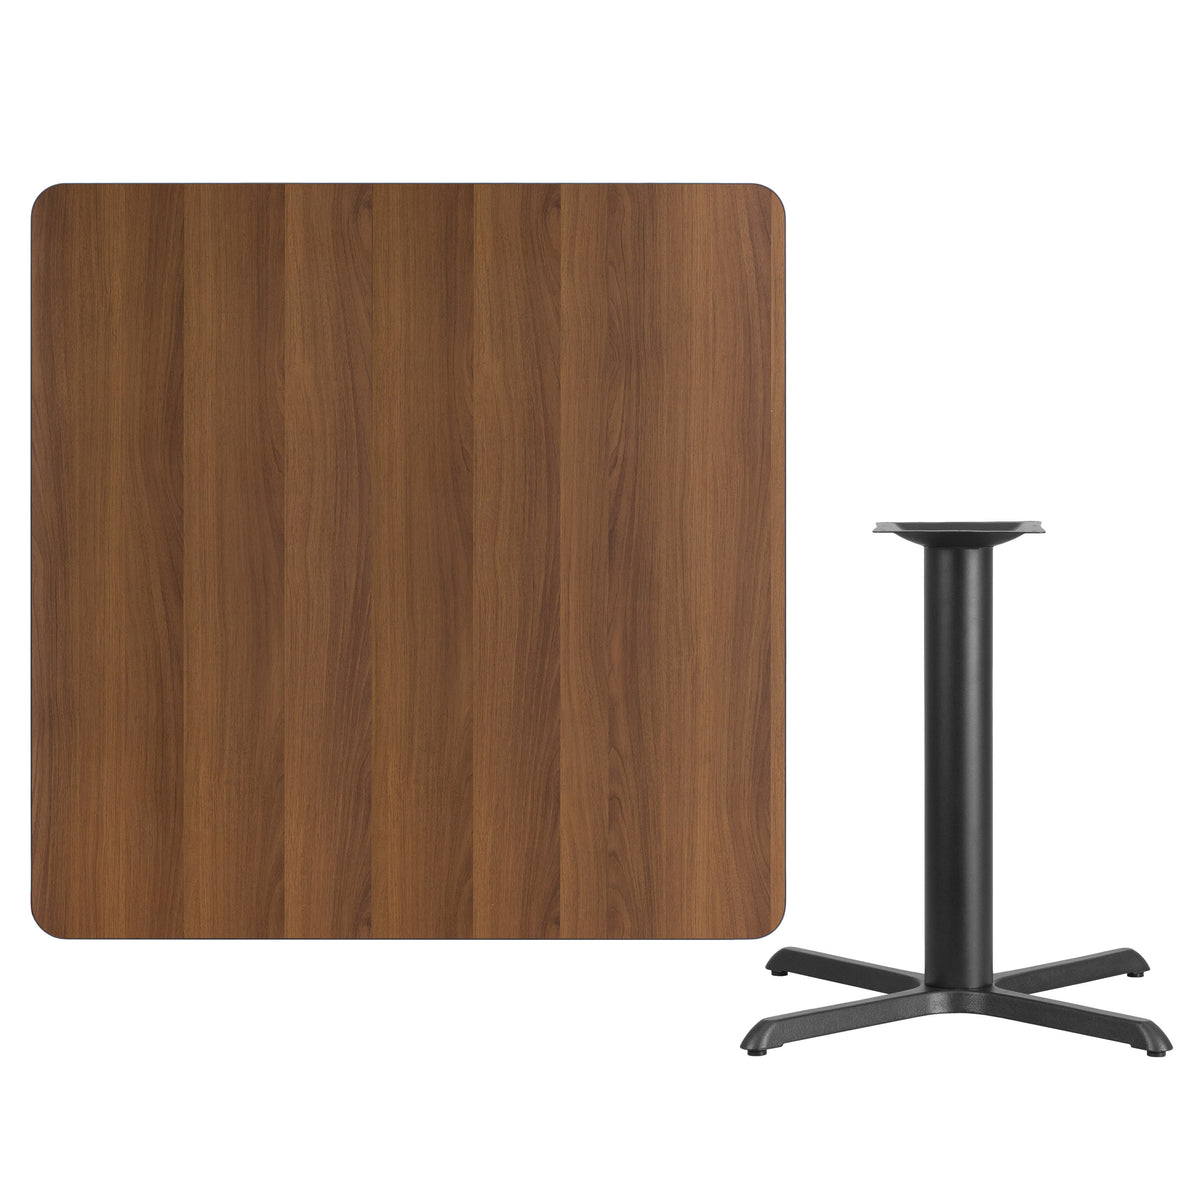 Walnut |#| 42inch Square Walnut Laminate Table Top with 33inch x 33inch Table Height Base